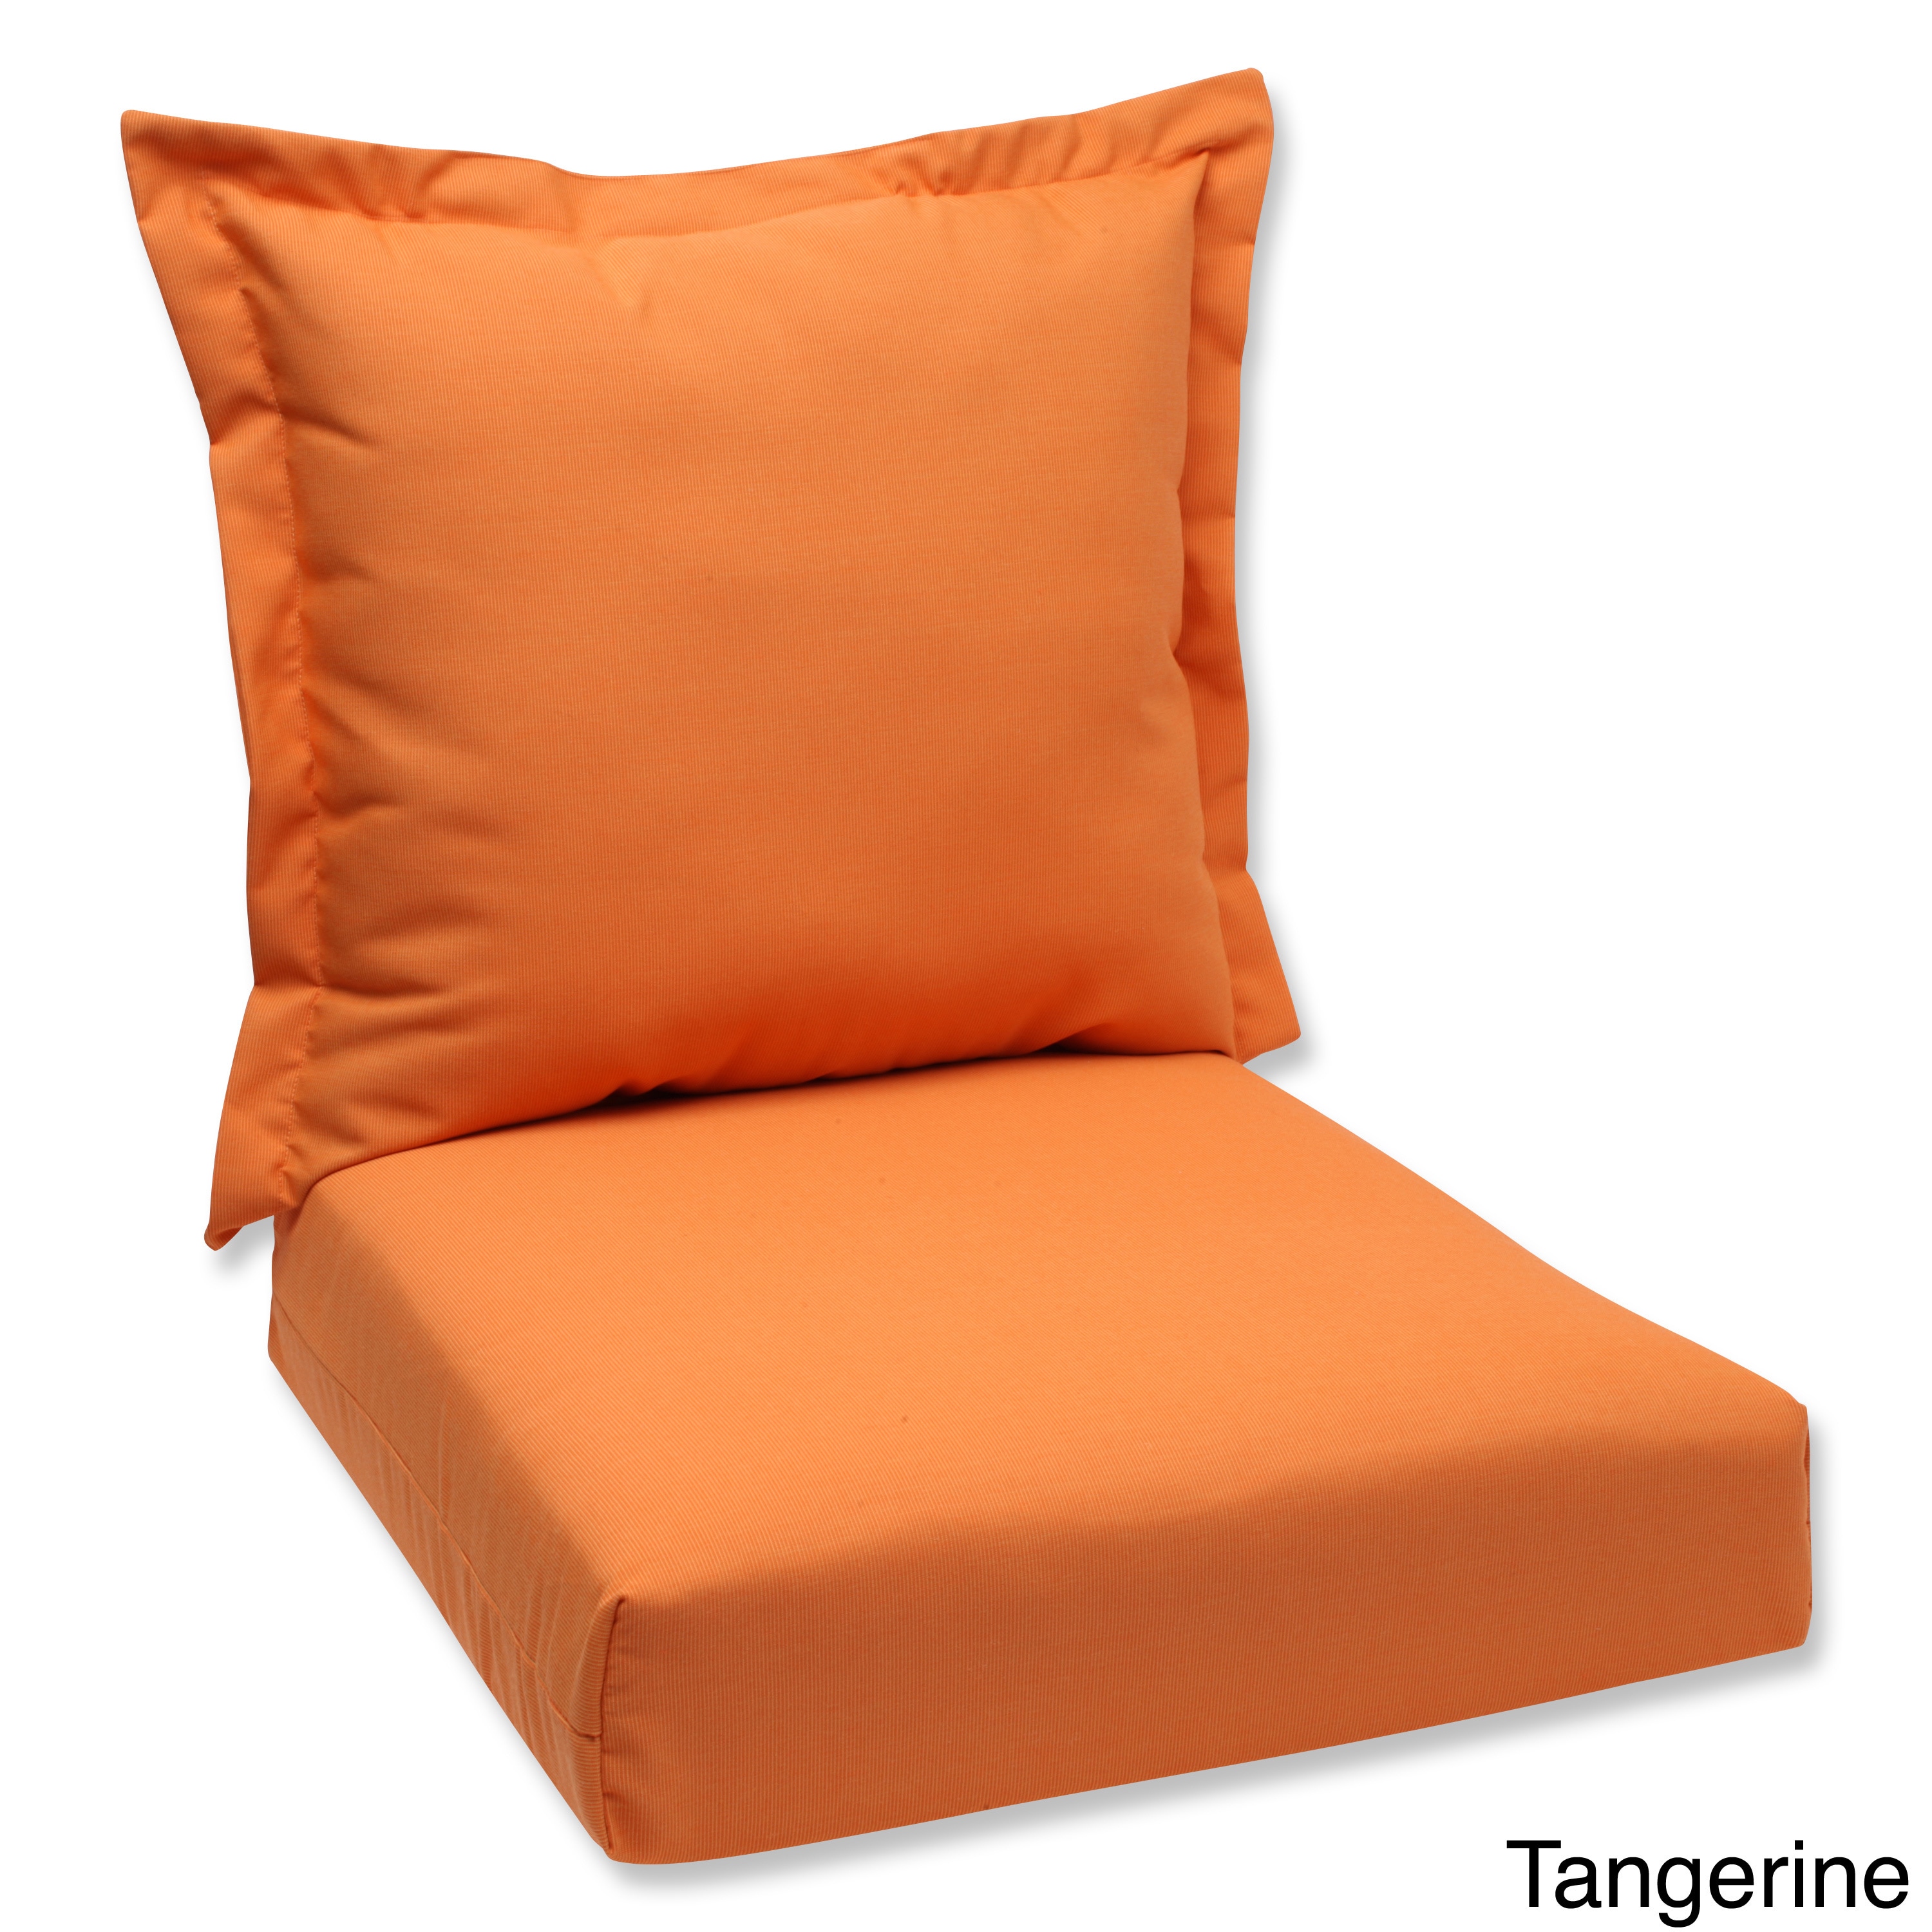 Tangerine Pillow Perfect Deep Seating Cushion And Back Pillow With Sunbrella Fabric 95af2fe6 2c8a 4441 8b5b 520d3f10e558 